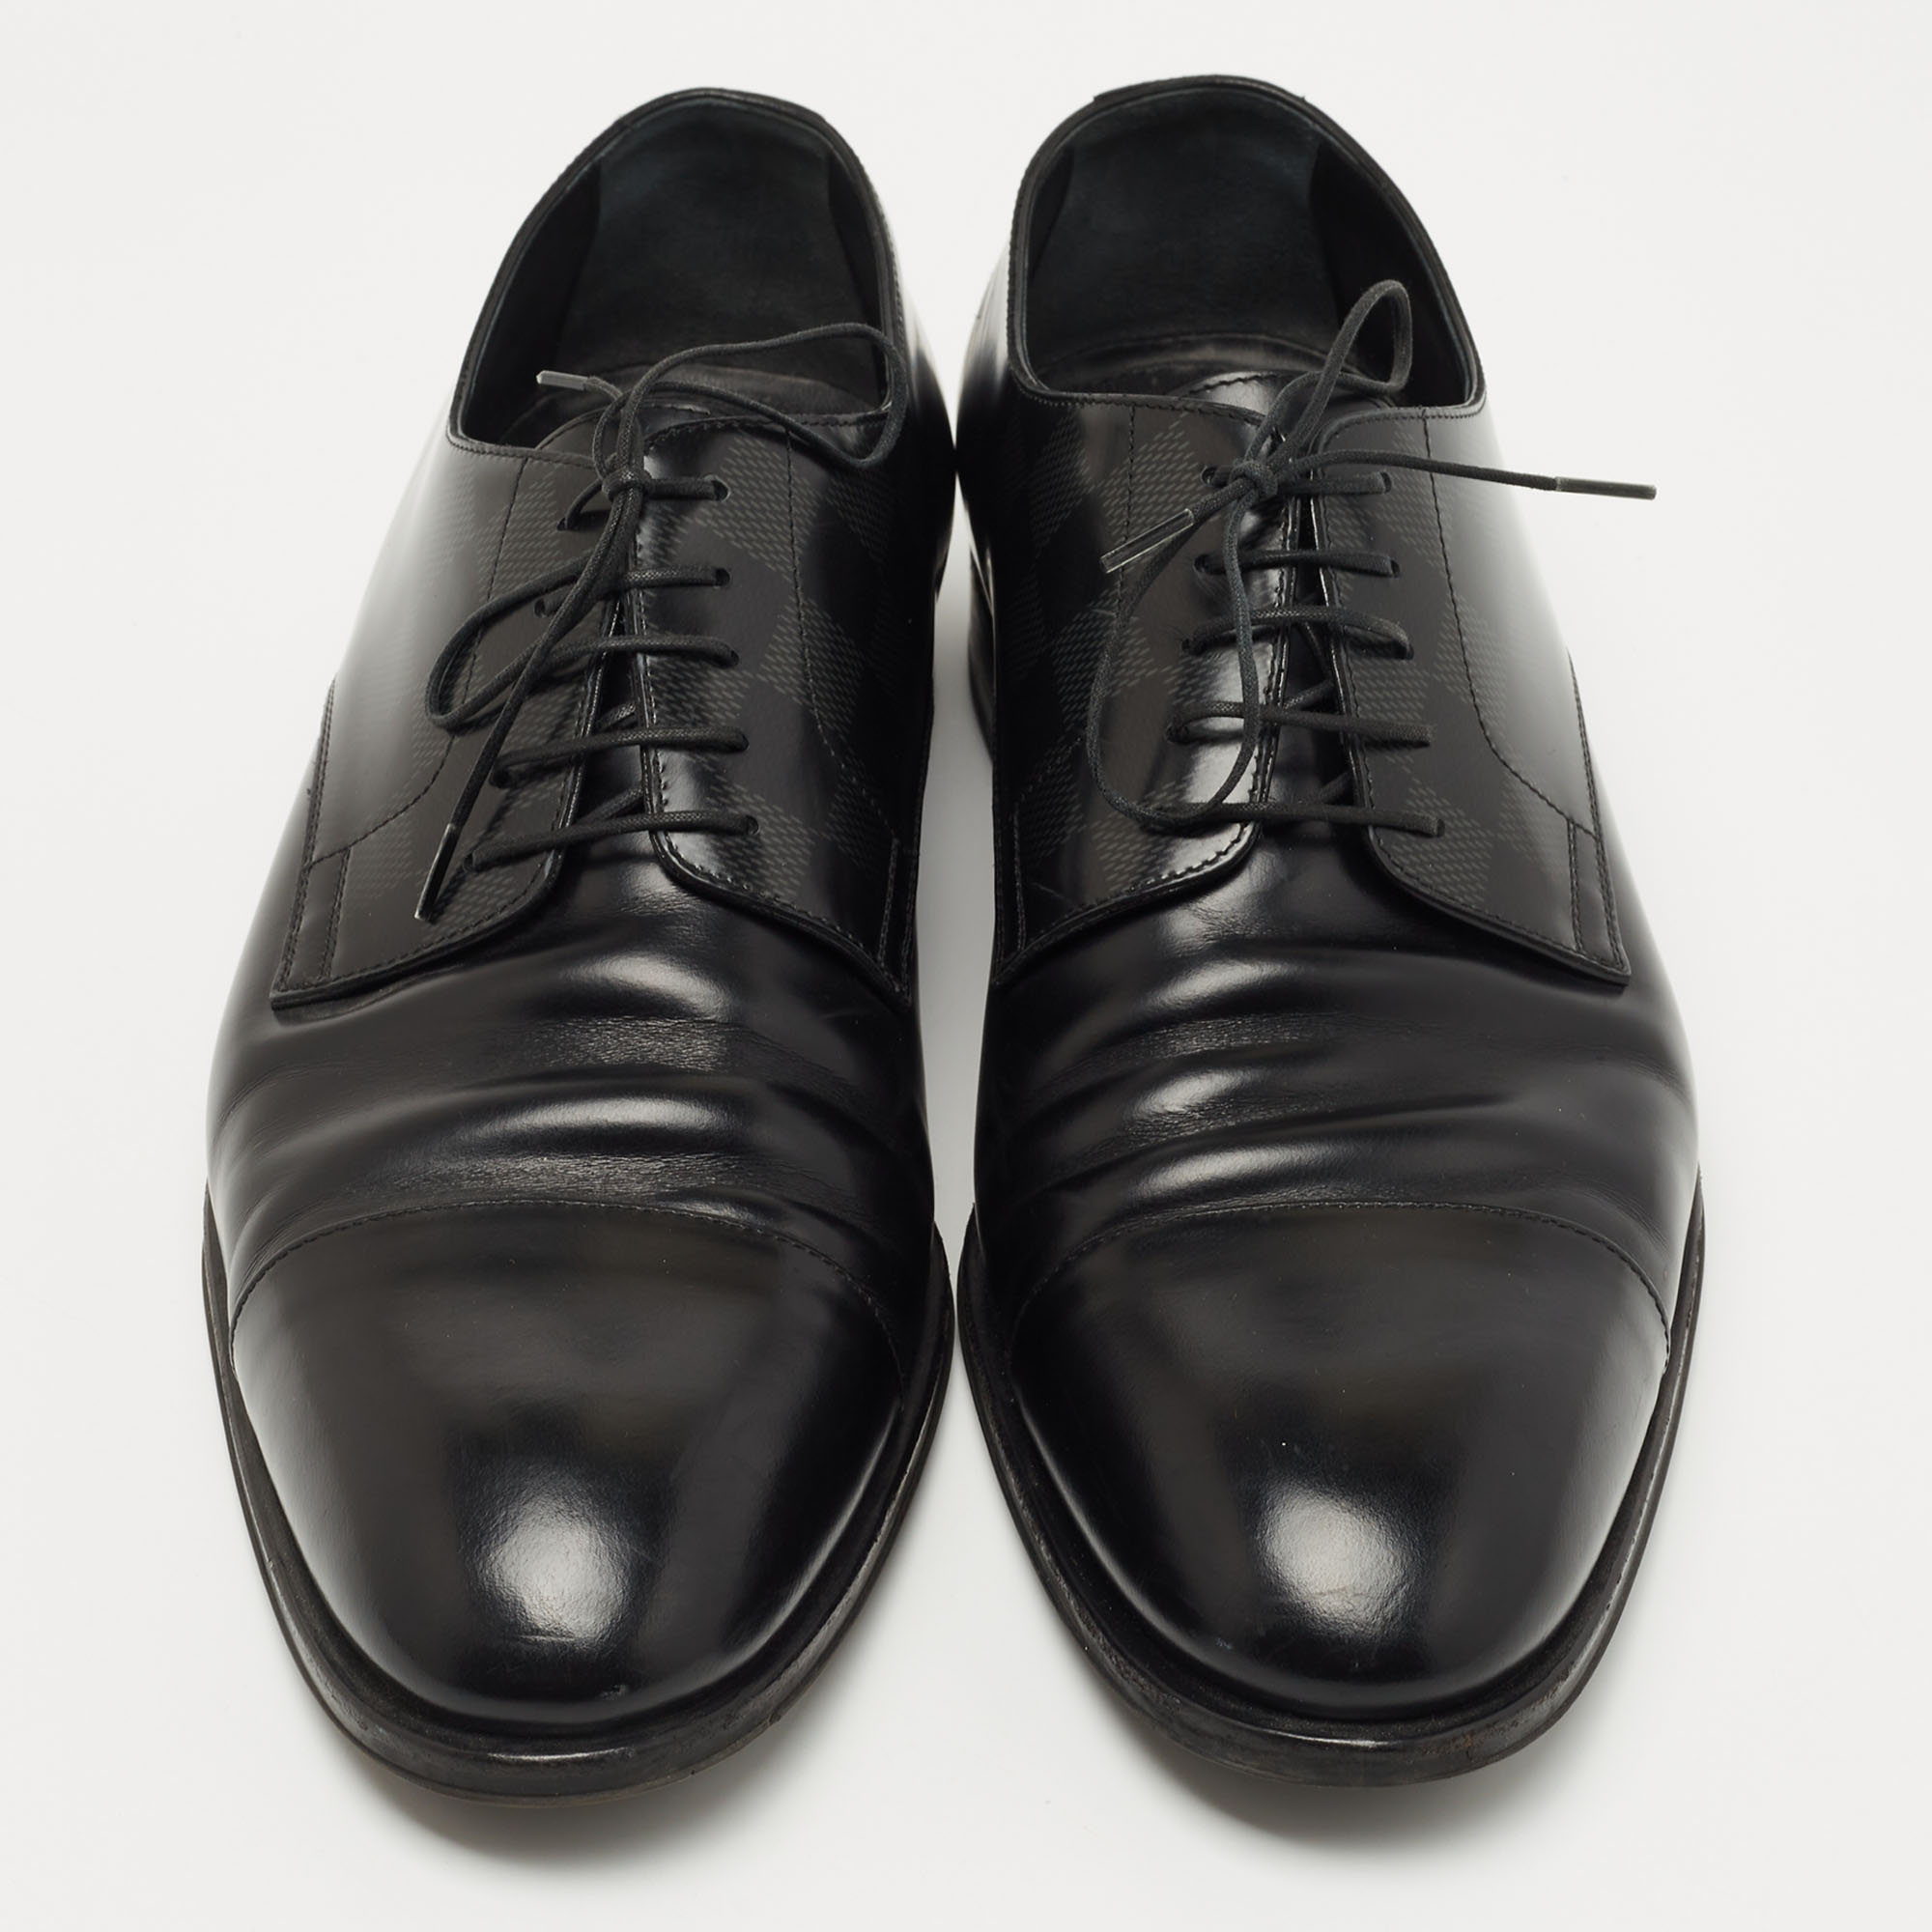 Louis Vuitton Black Damier Embossed Leather Lace Up Oxfords Size 43.5